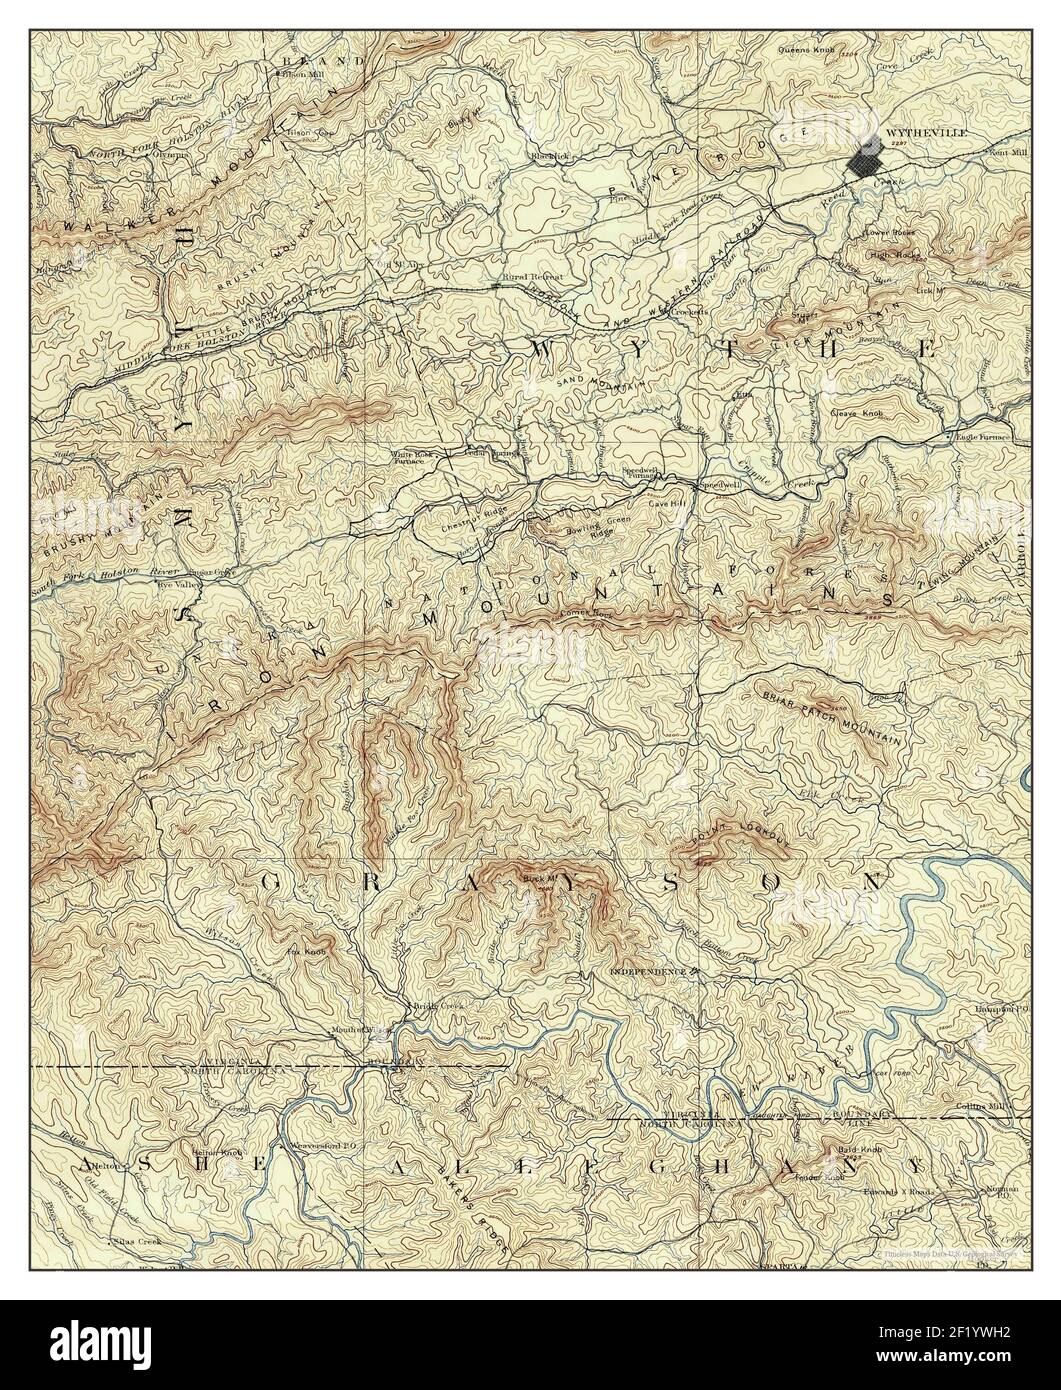 Wytheville, Virginia, map 1892, 1:125000, United States of America by Timeless Maps, data U.S. Geological Survey Stock Photo